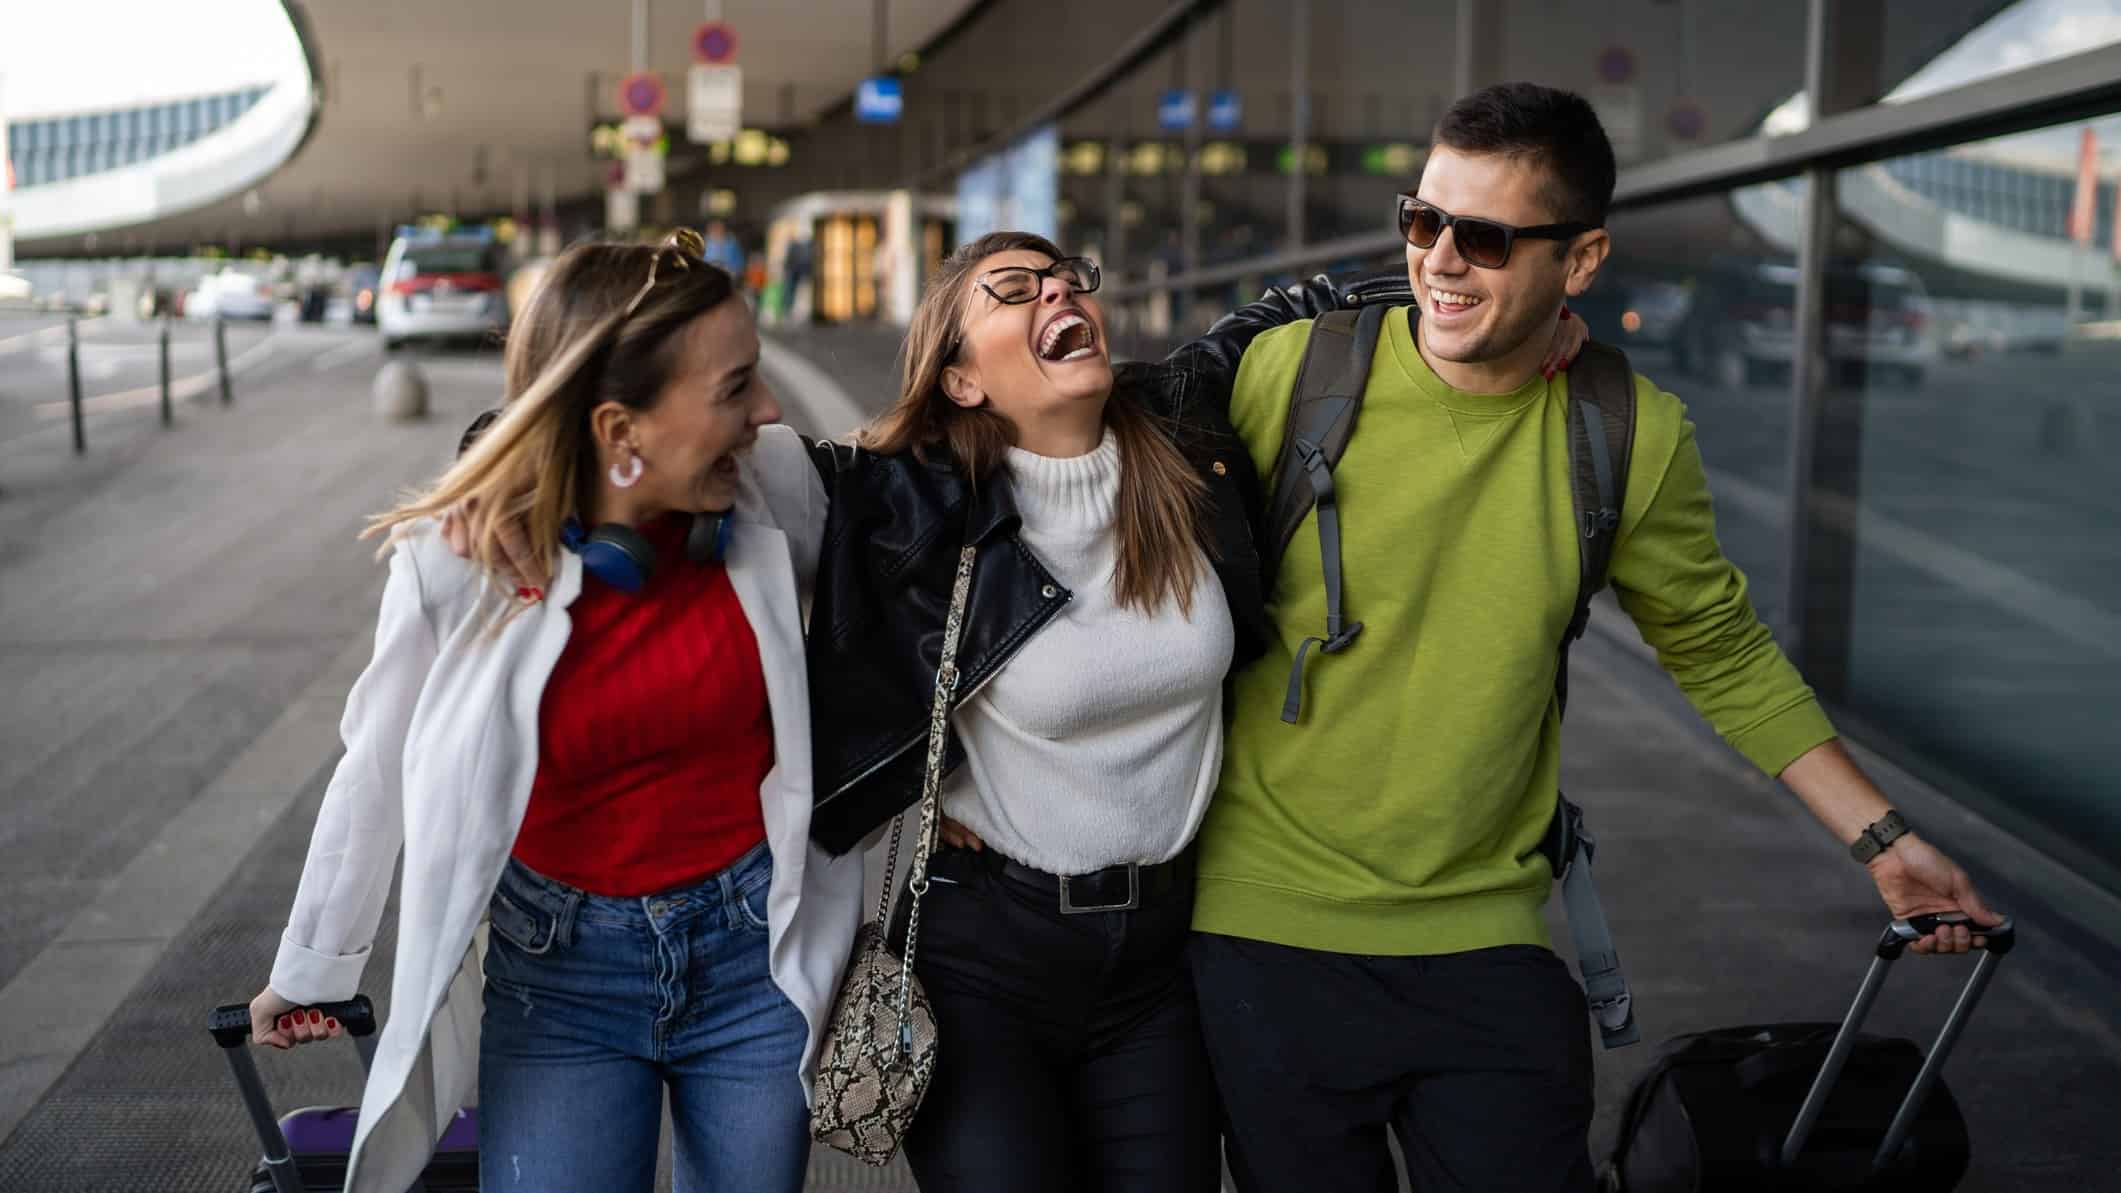 Three travellers laughing and smiling outside airport